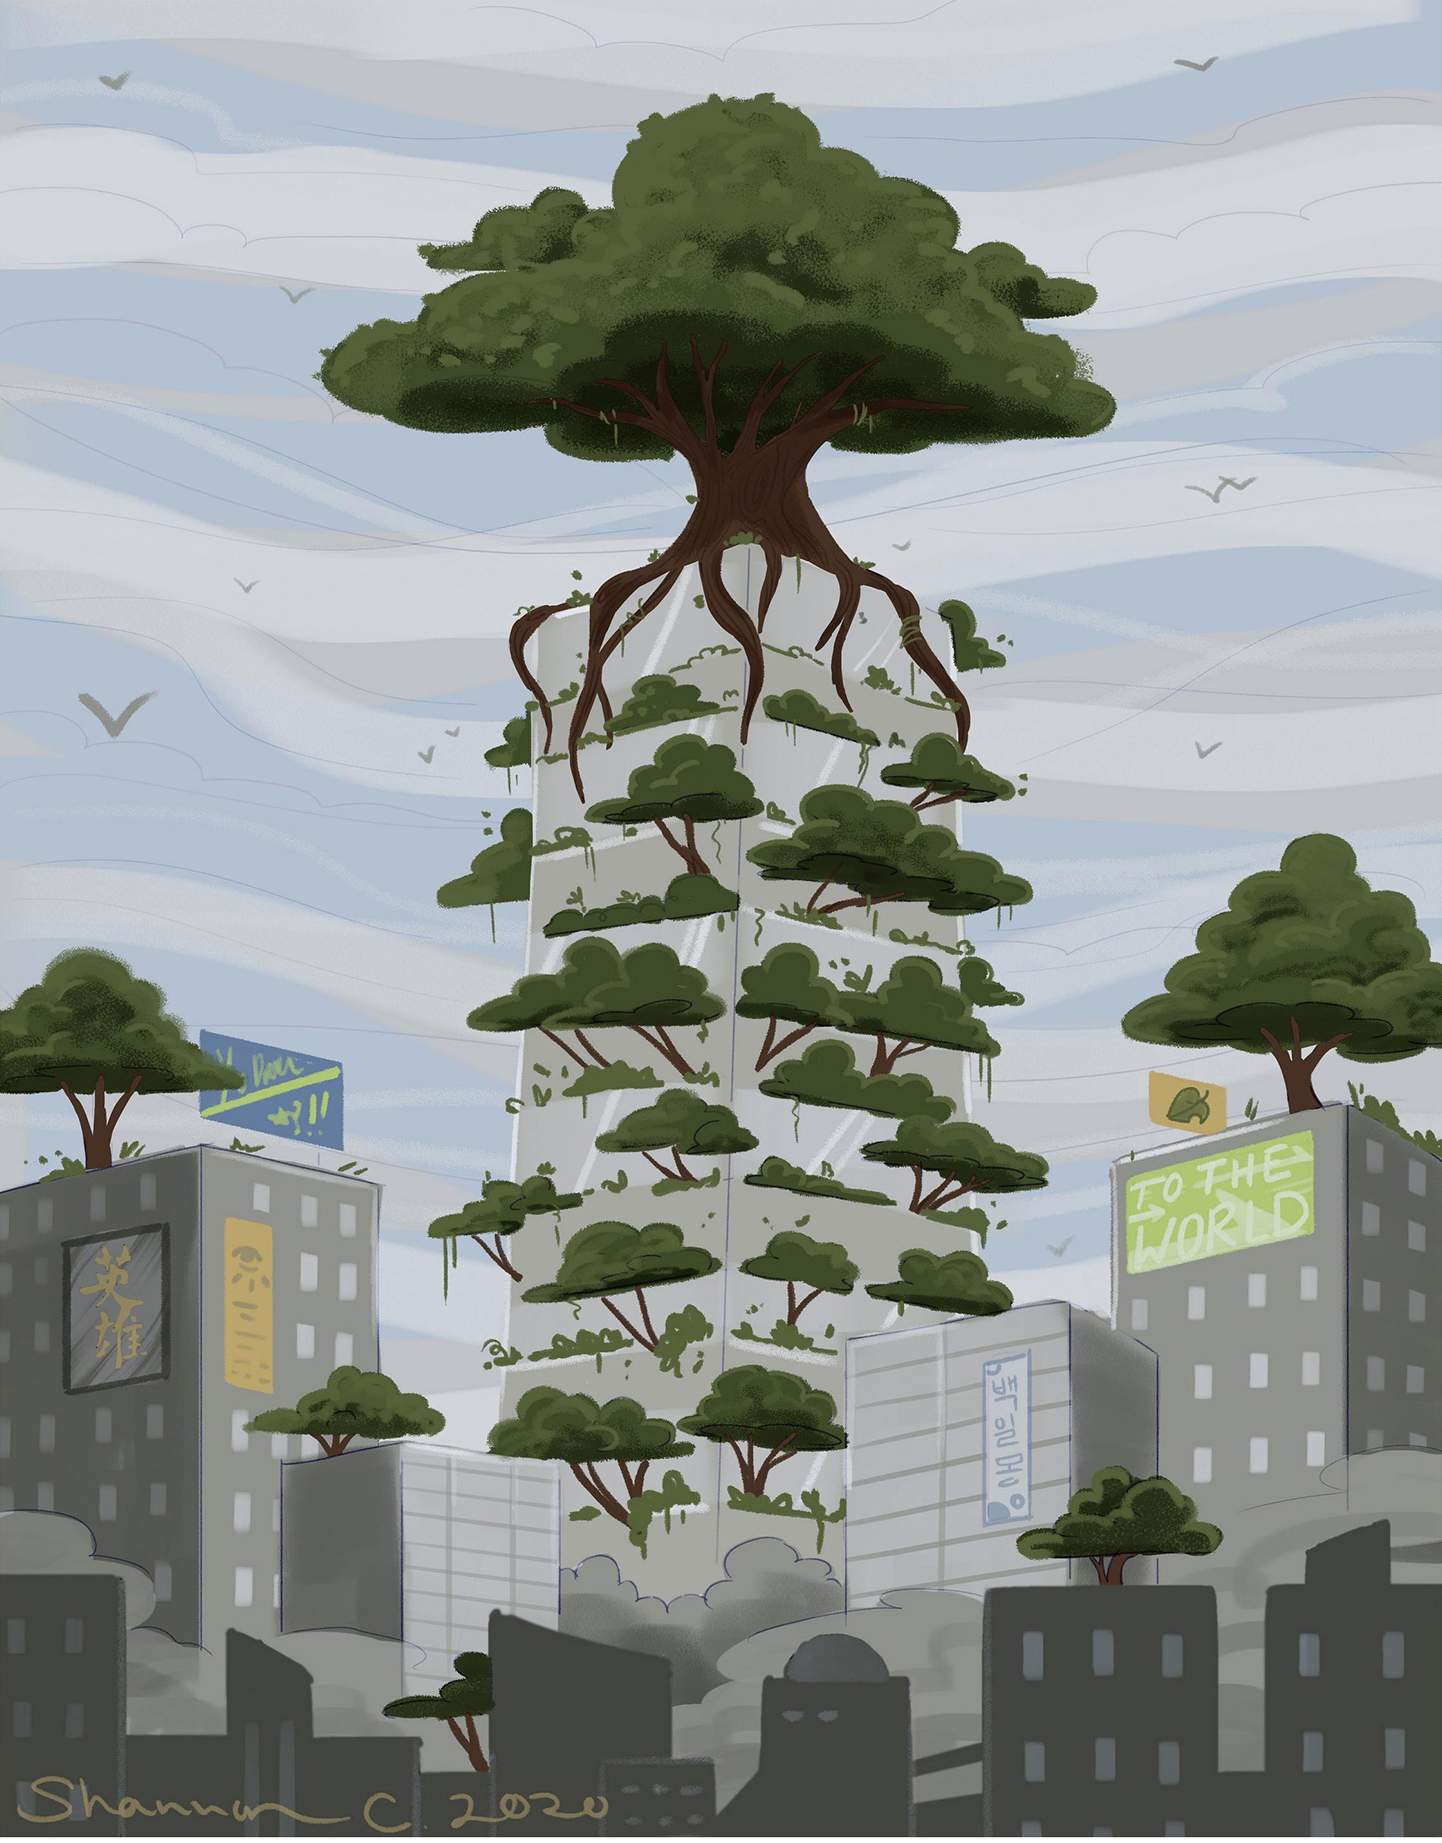 A cityscape with trees growing on buildings.